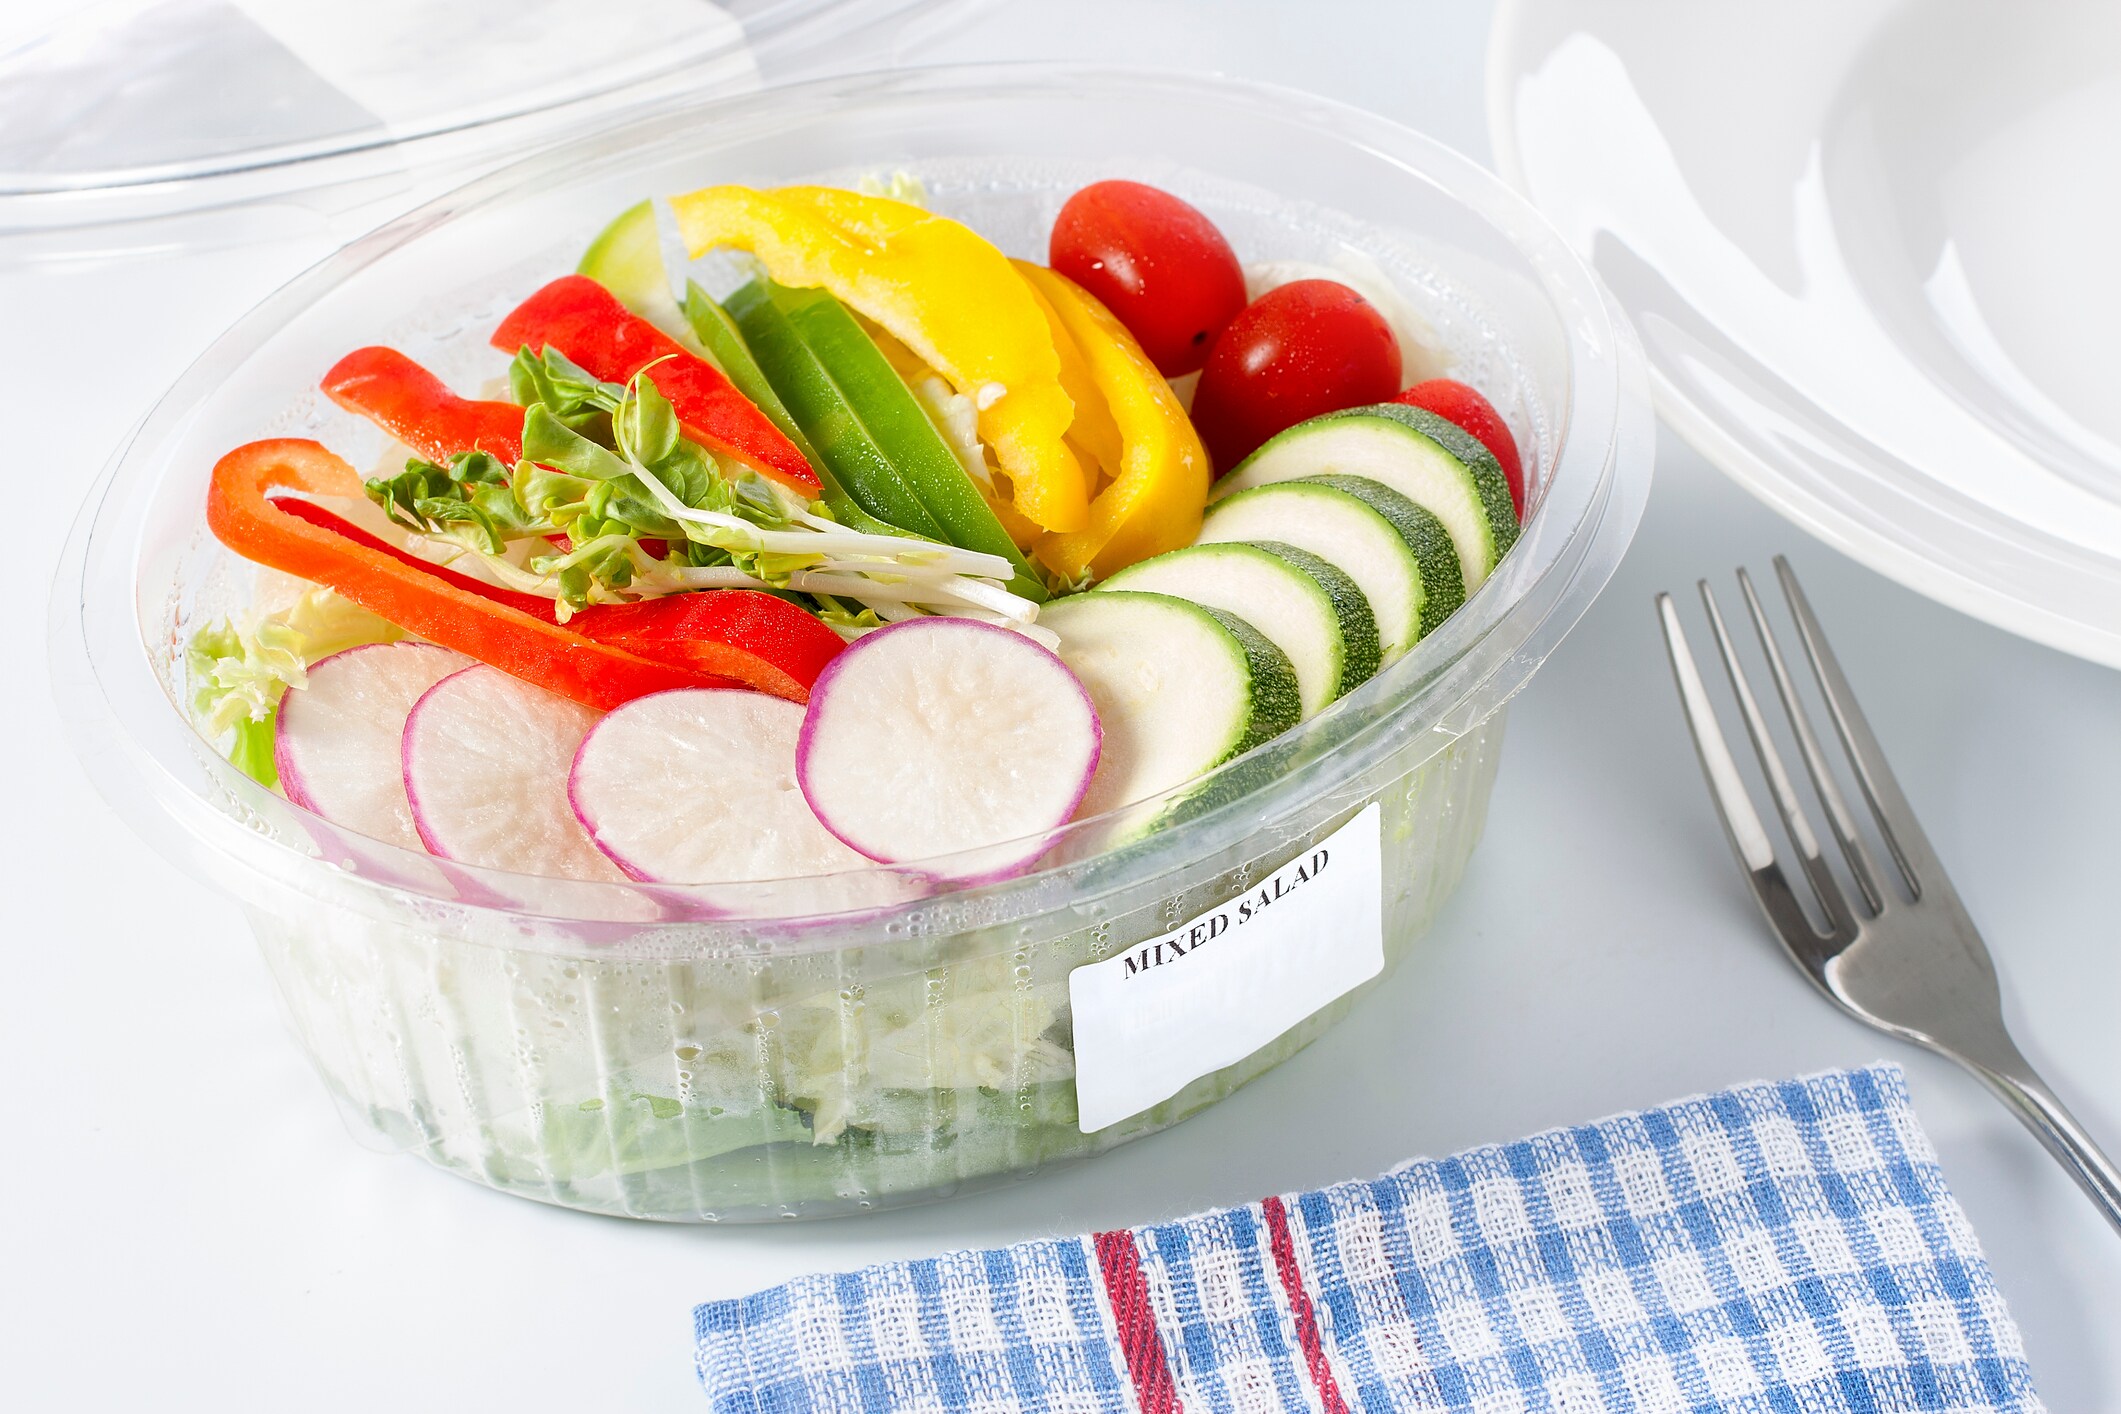 Is Your Salad Take-Out Container a Hazardous Material? - Advancing Materials